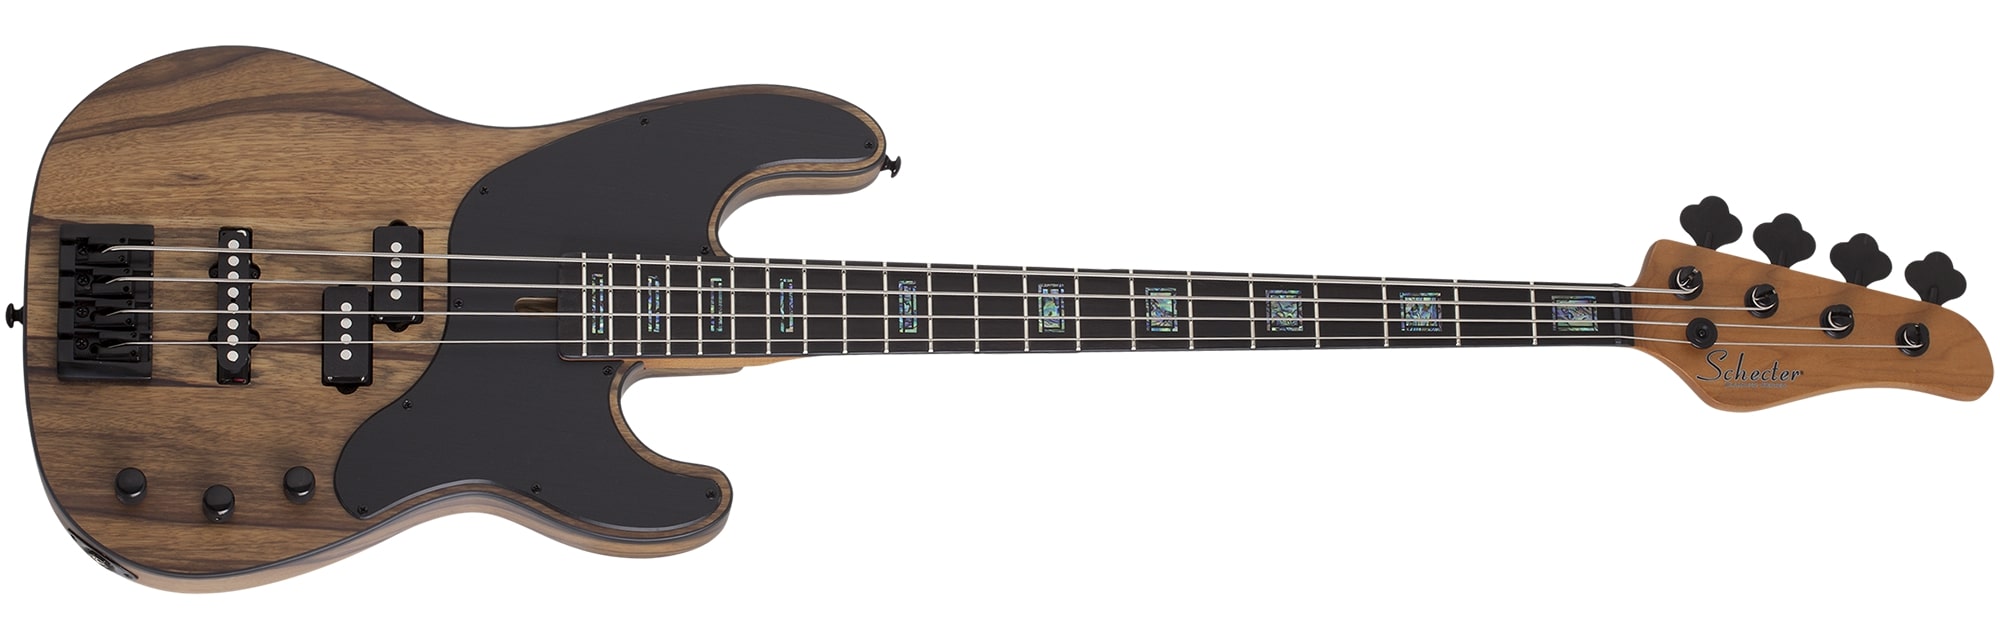 Schecter Model-T 4 Exotic Black Limba Electric Bass in Natural Satin 2832-SHC